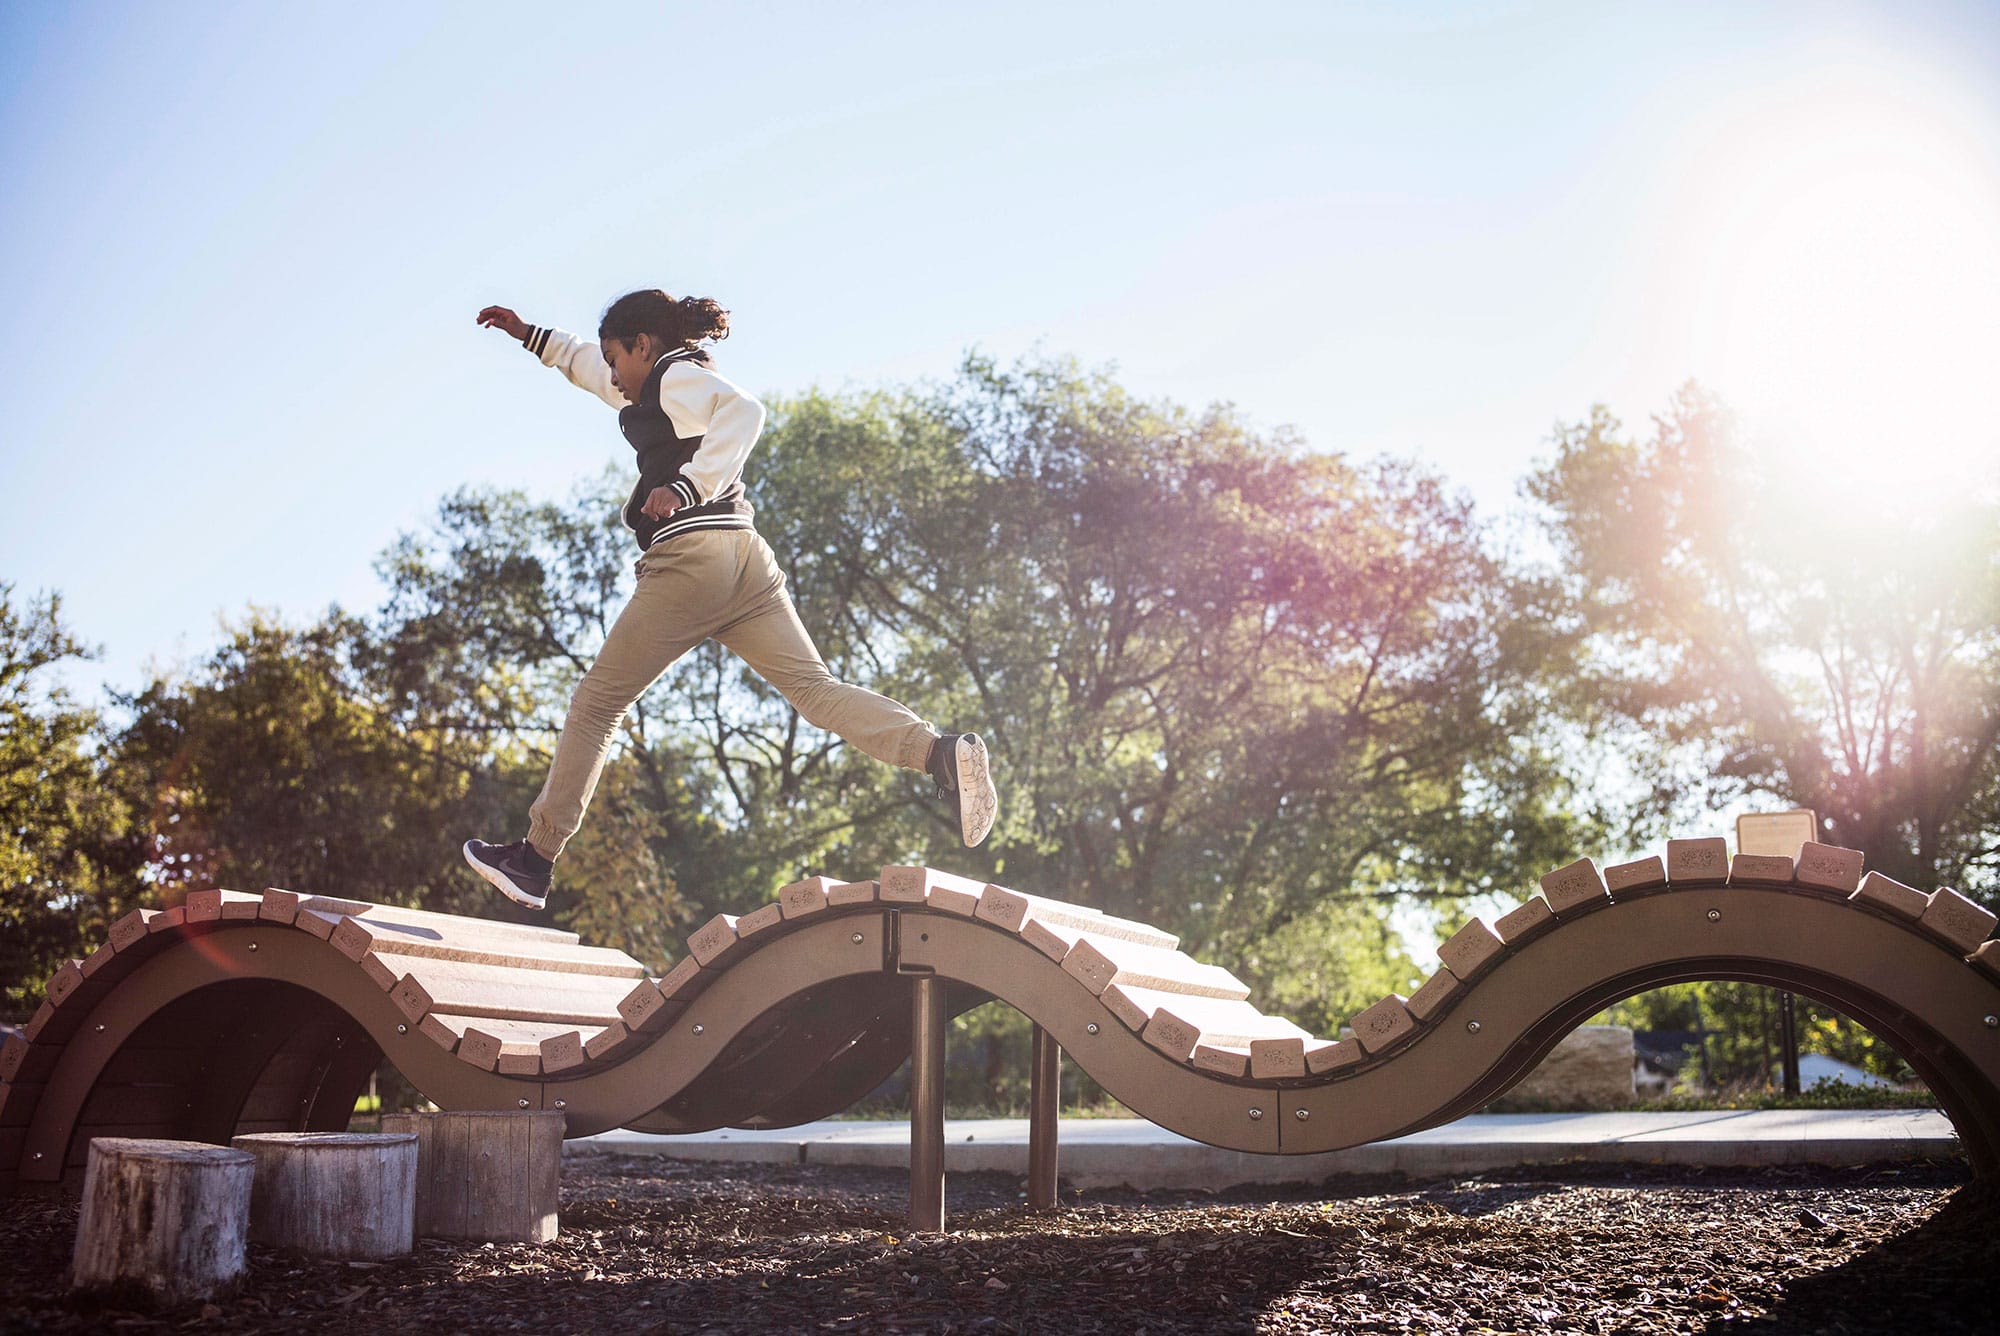 A boy jumping on a wooden structure in a park.